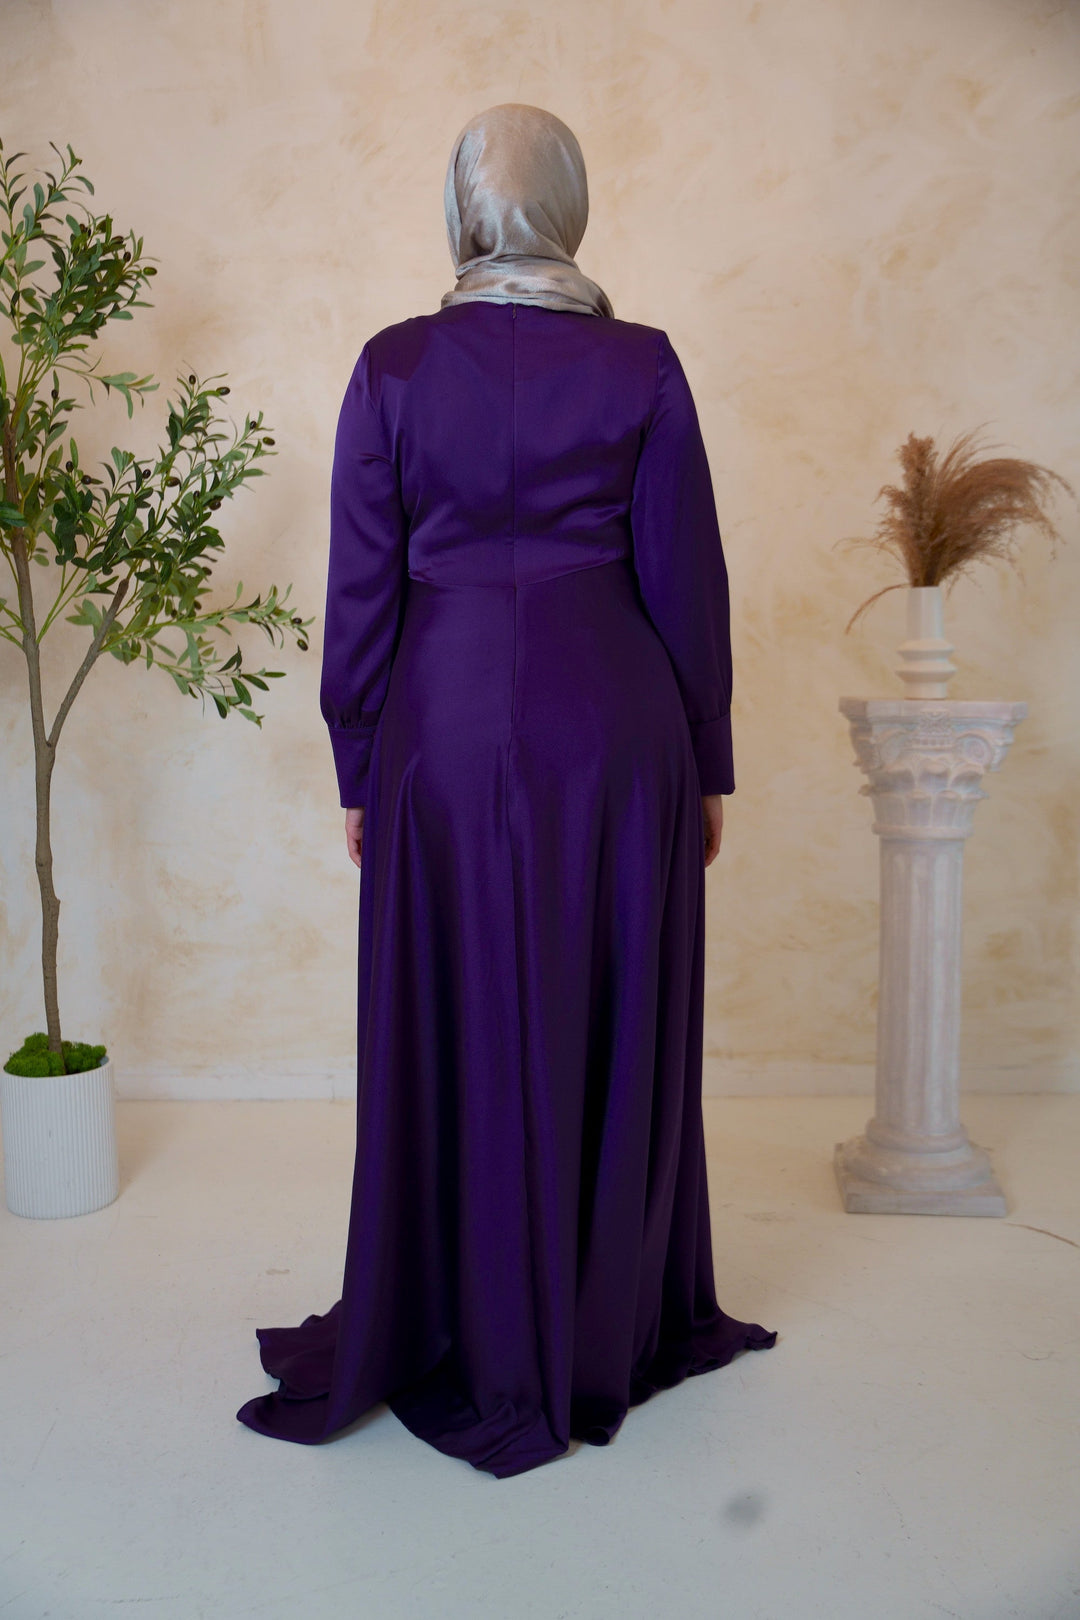 a woman in a purple dress standing next to a tree